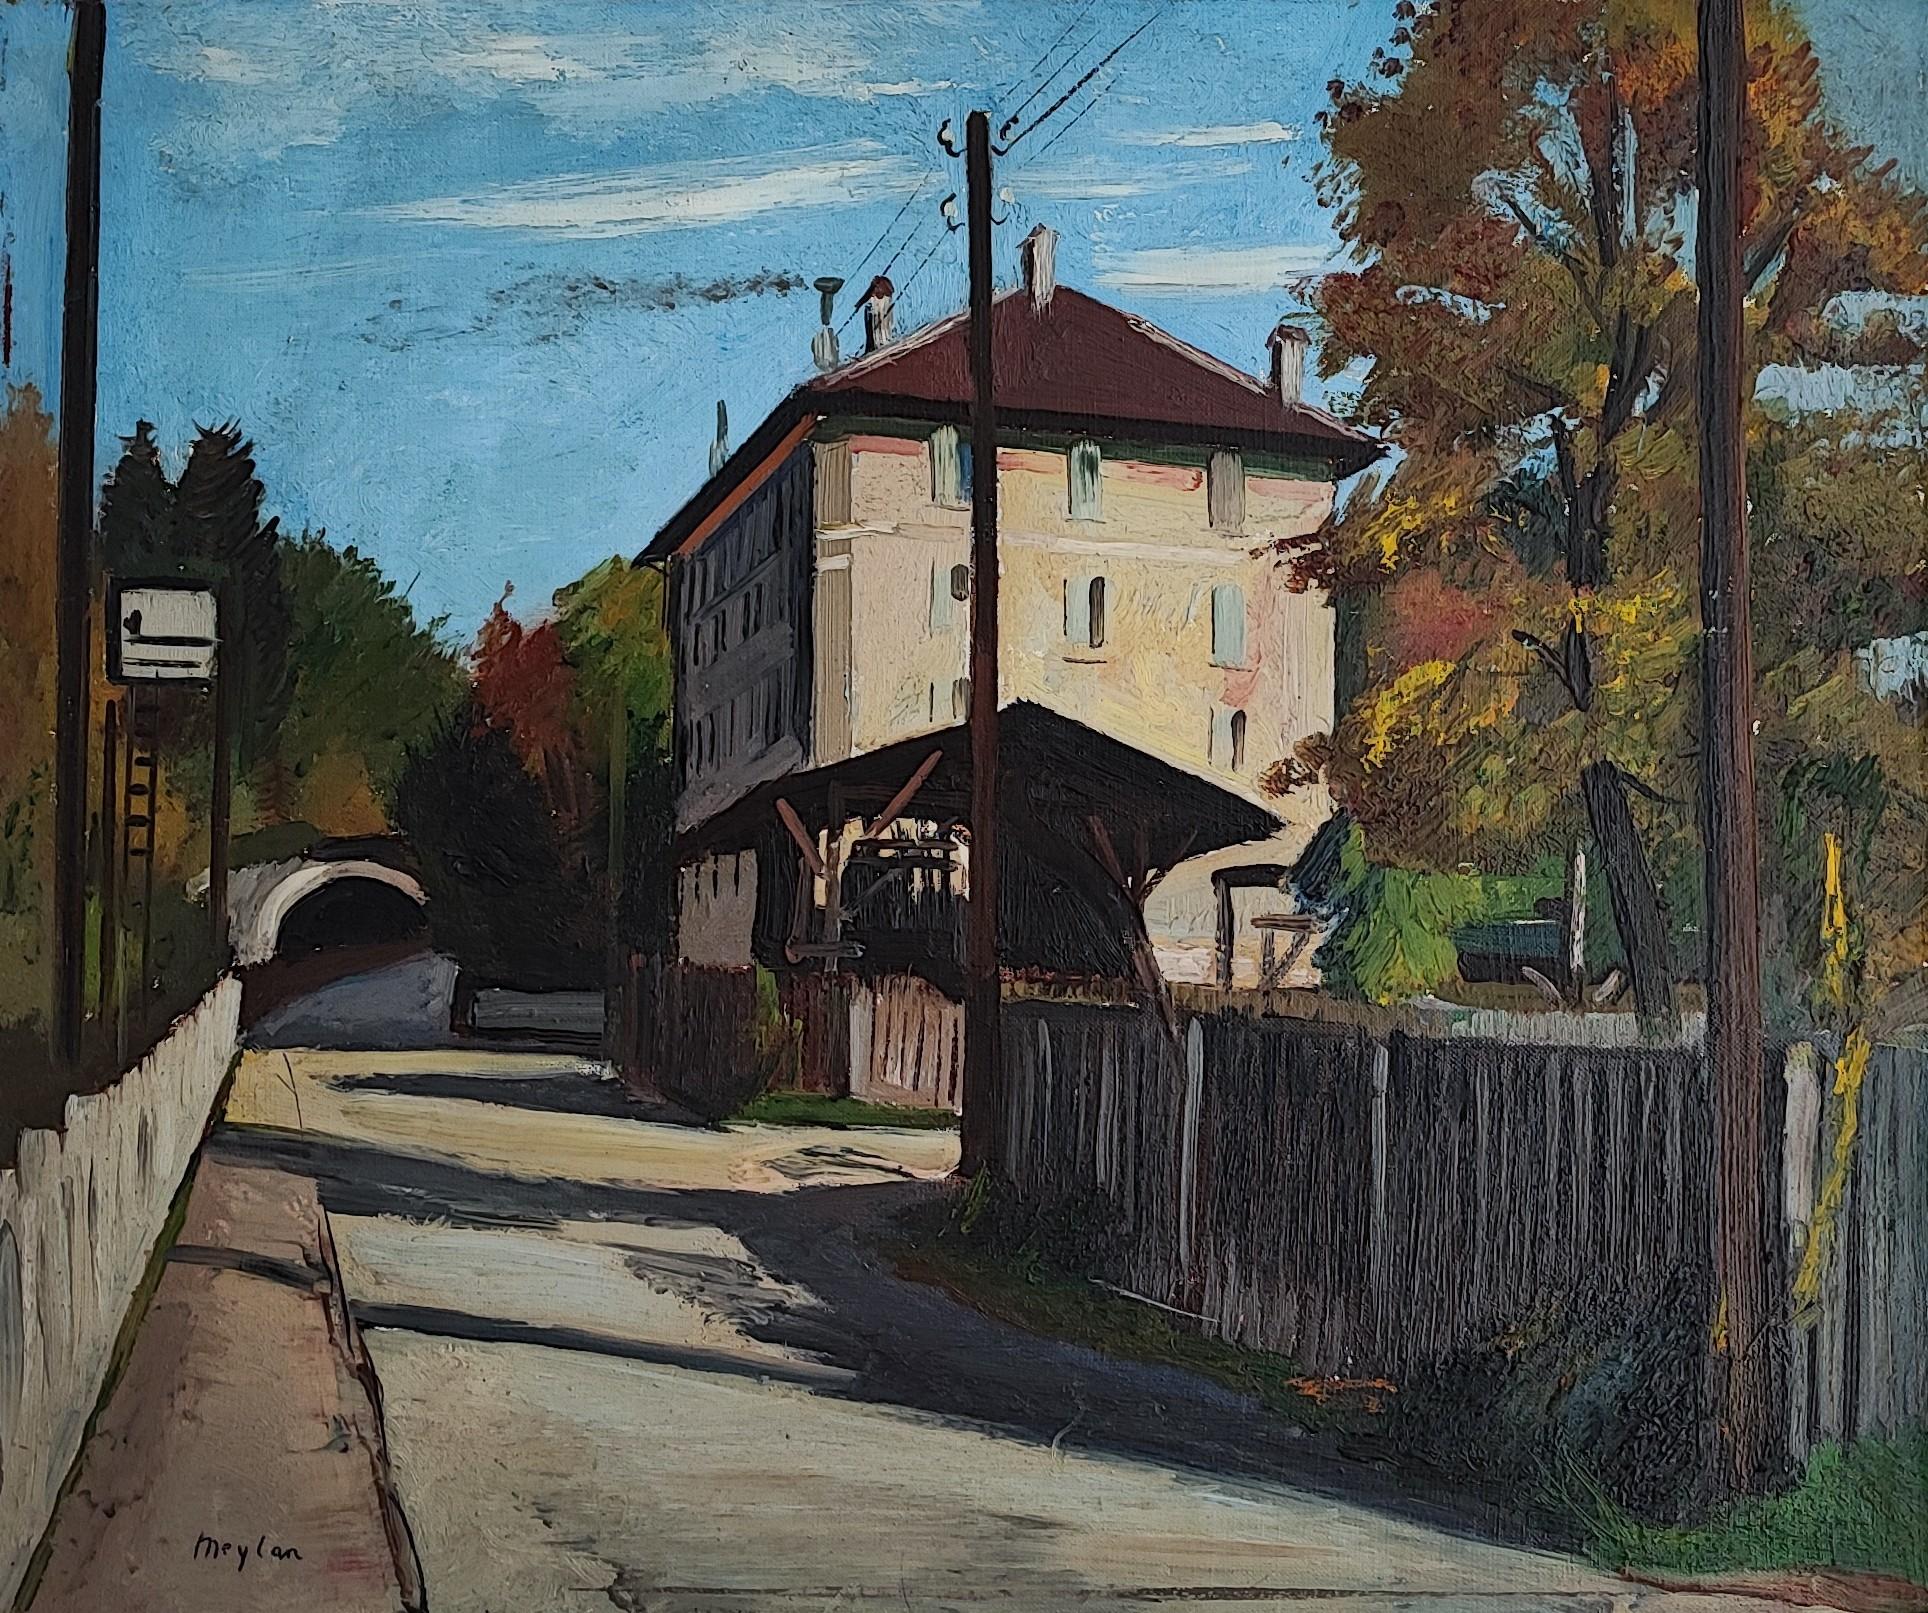 Next to the railway - Painting by Henry Meylan